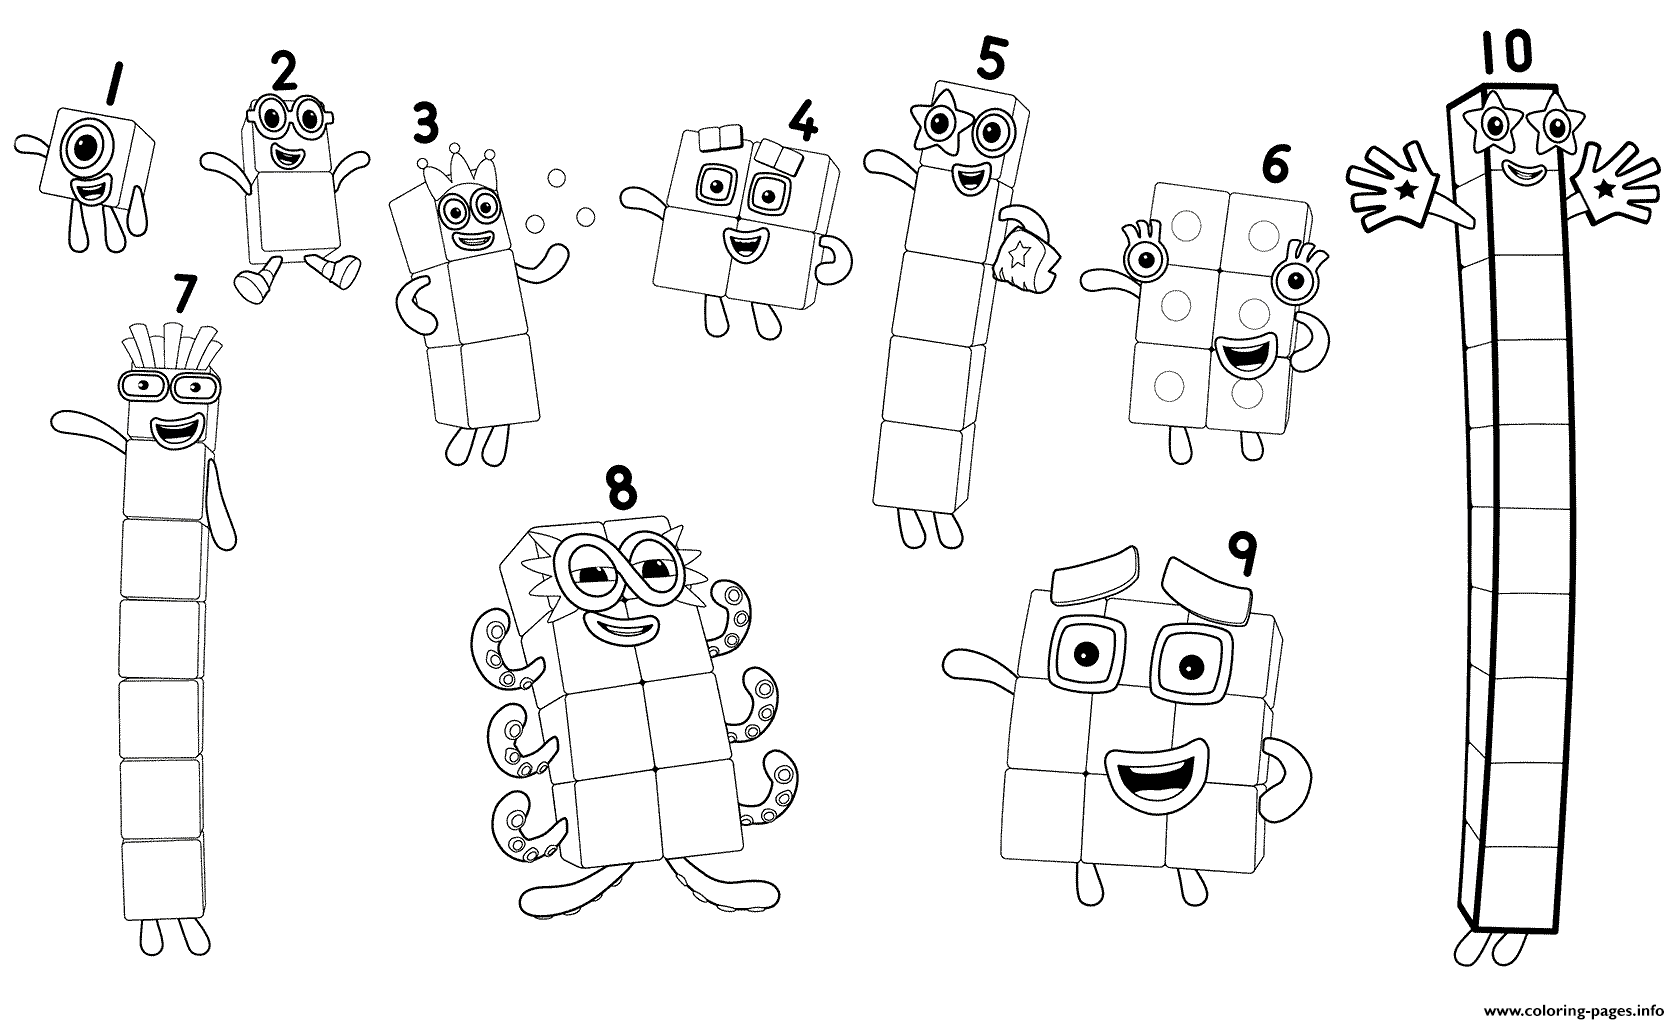 Numberblocks Coloring Page Fun House Toys Numberblocks The Main Characters Consist Of Blocks